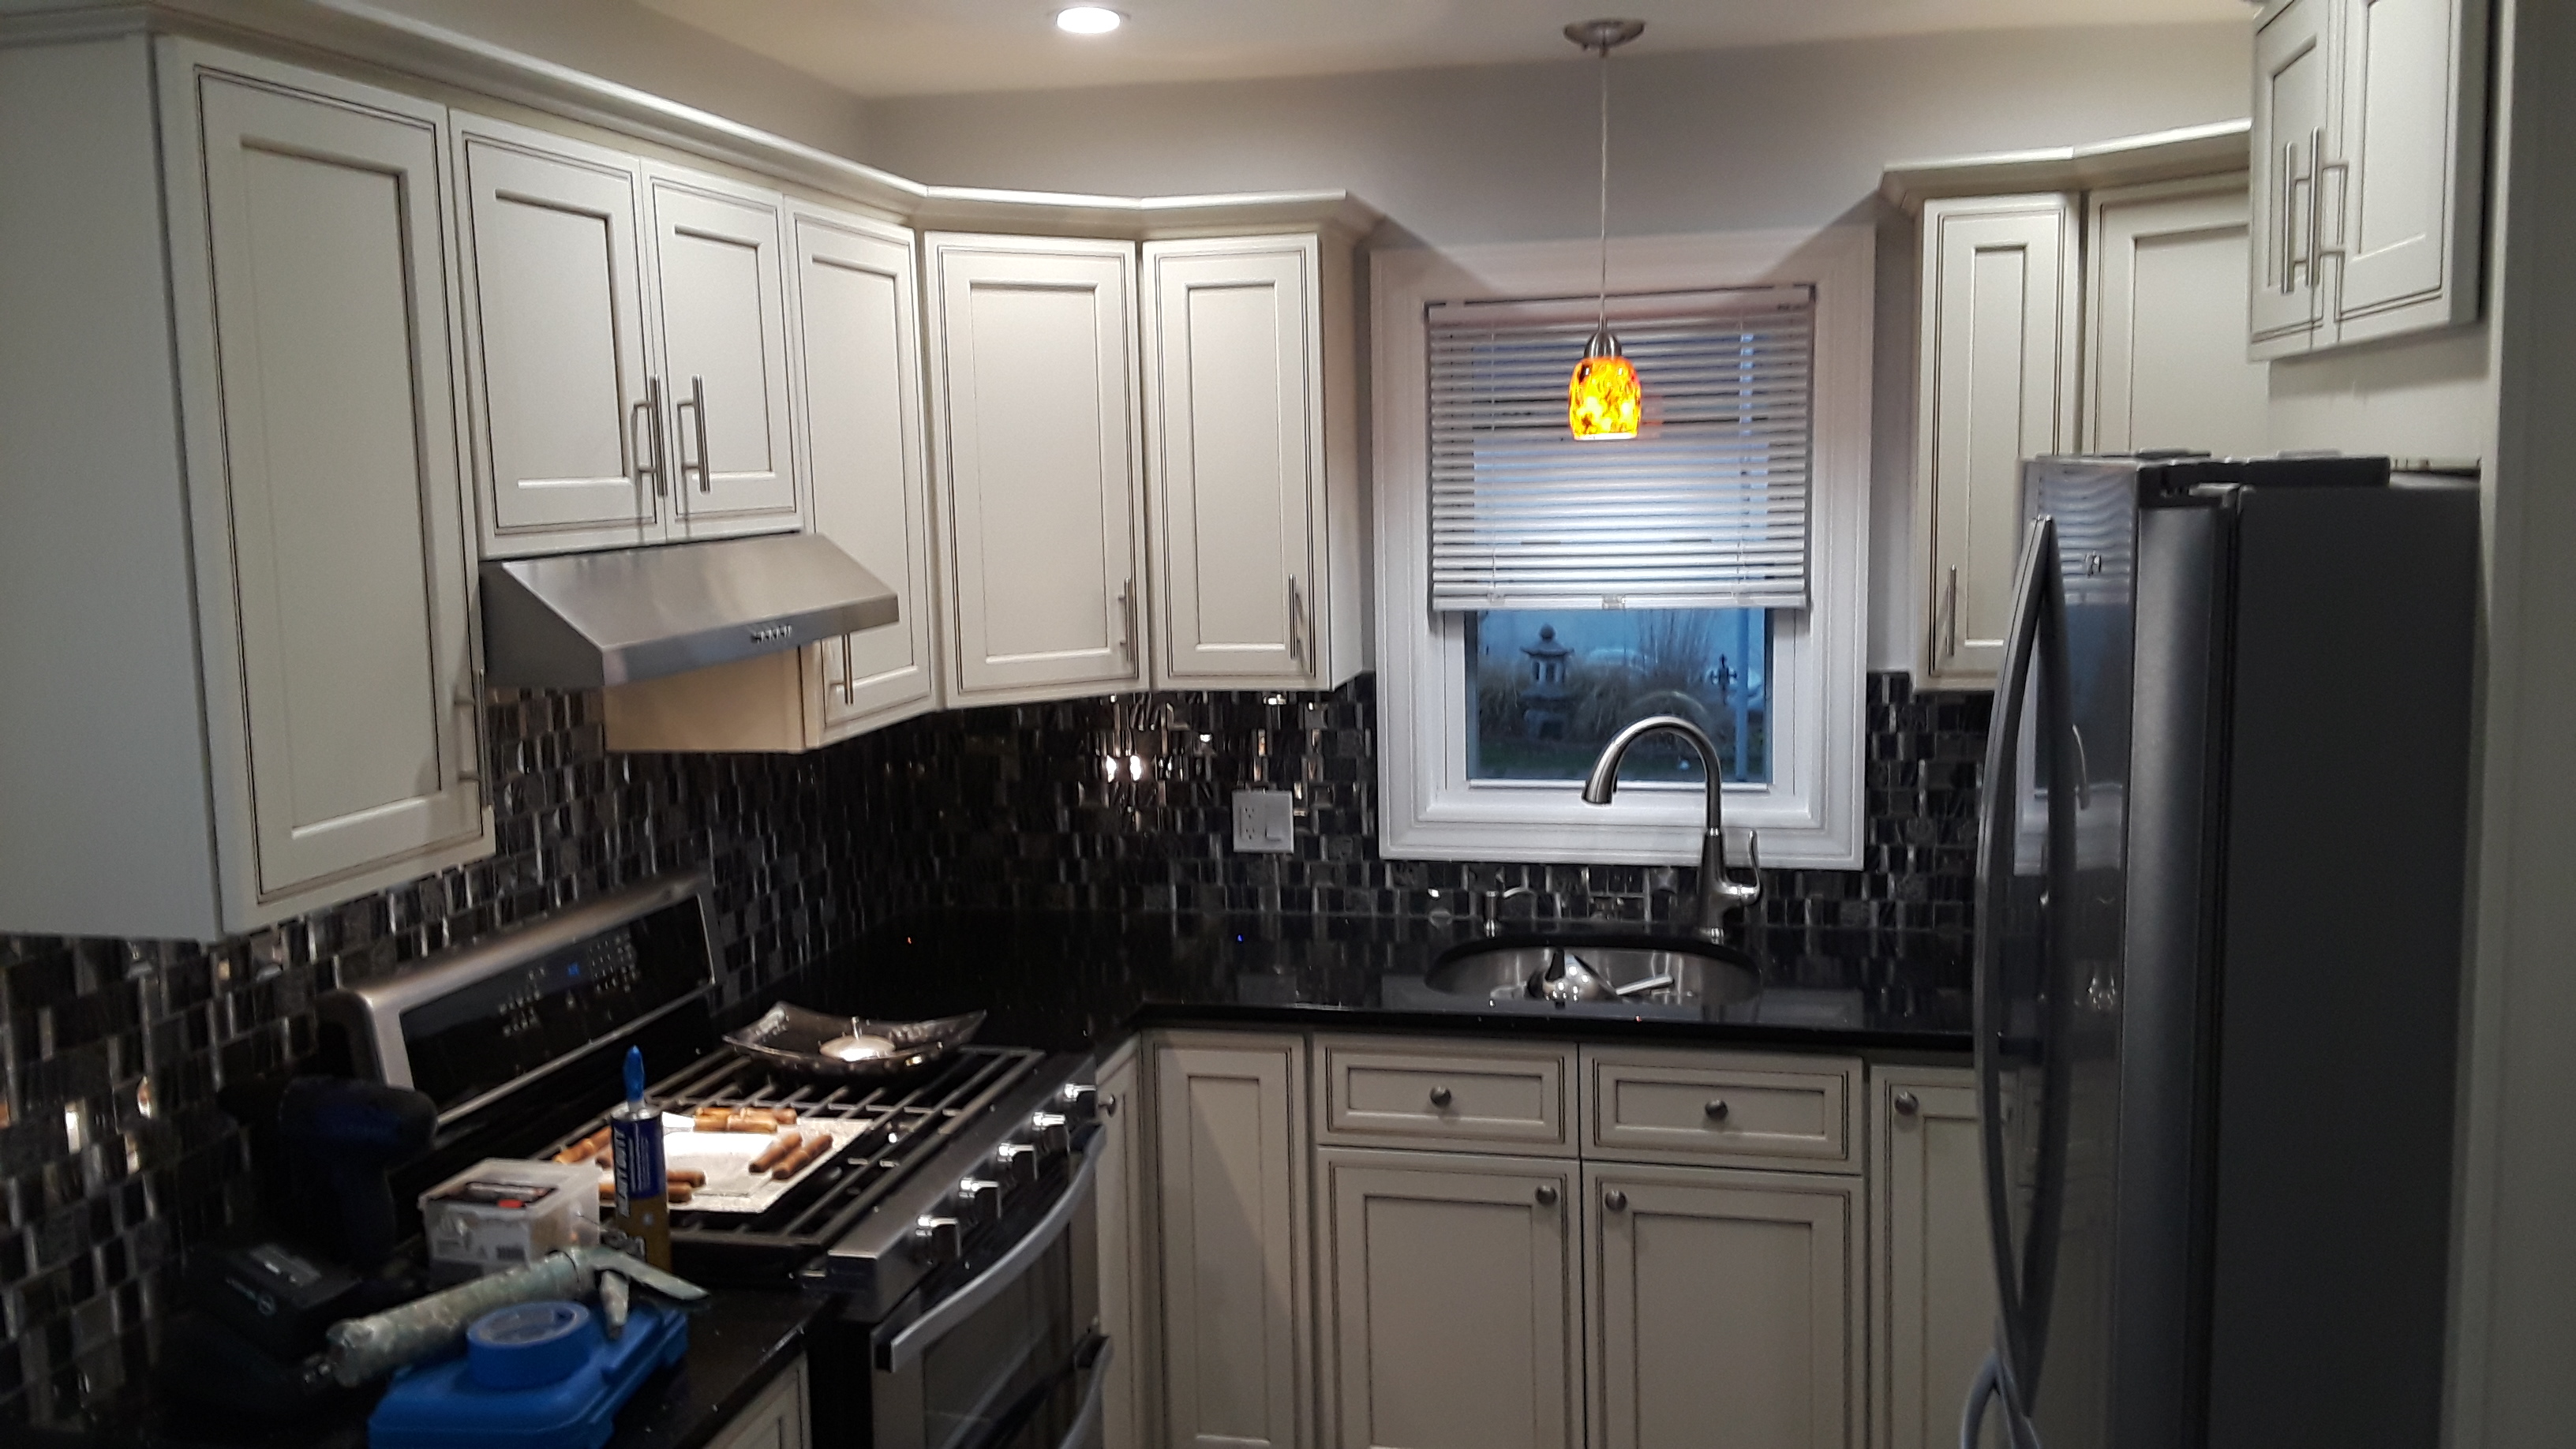 Northwest Indiana Kitchen Remodeling and Design Company